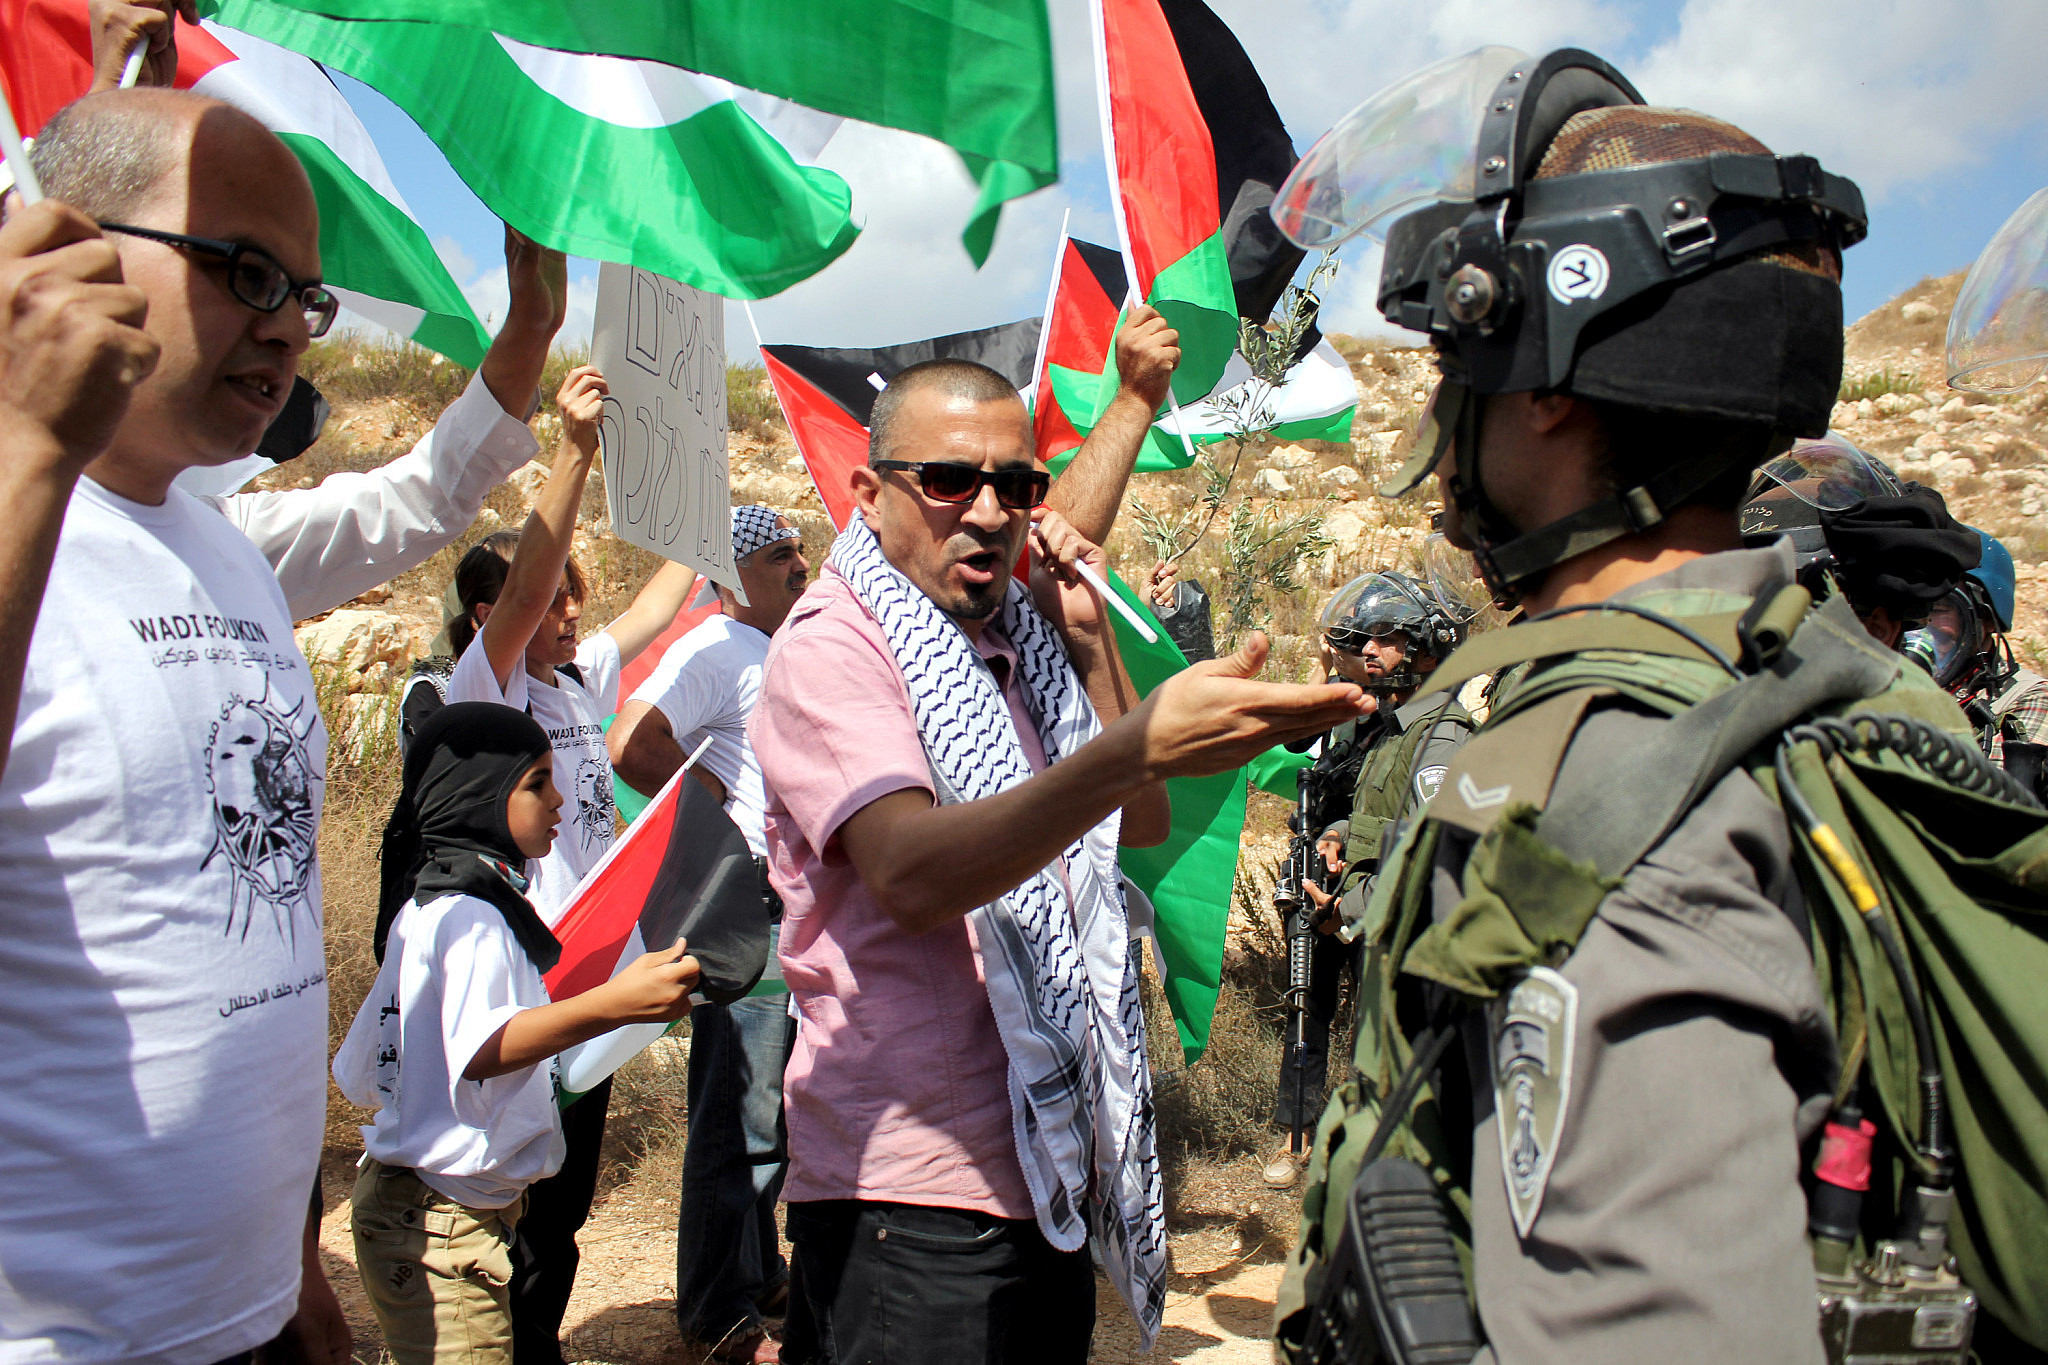 Palestinians confront Israeli soldiers during a protest against Israel's decision to confiscate 1,500 dunams of land in the village of Wadi Fukin, near Bethlehem, West Bank, September 26, 2014. (Mustafa Bader/Activestills)